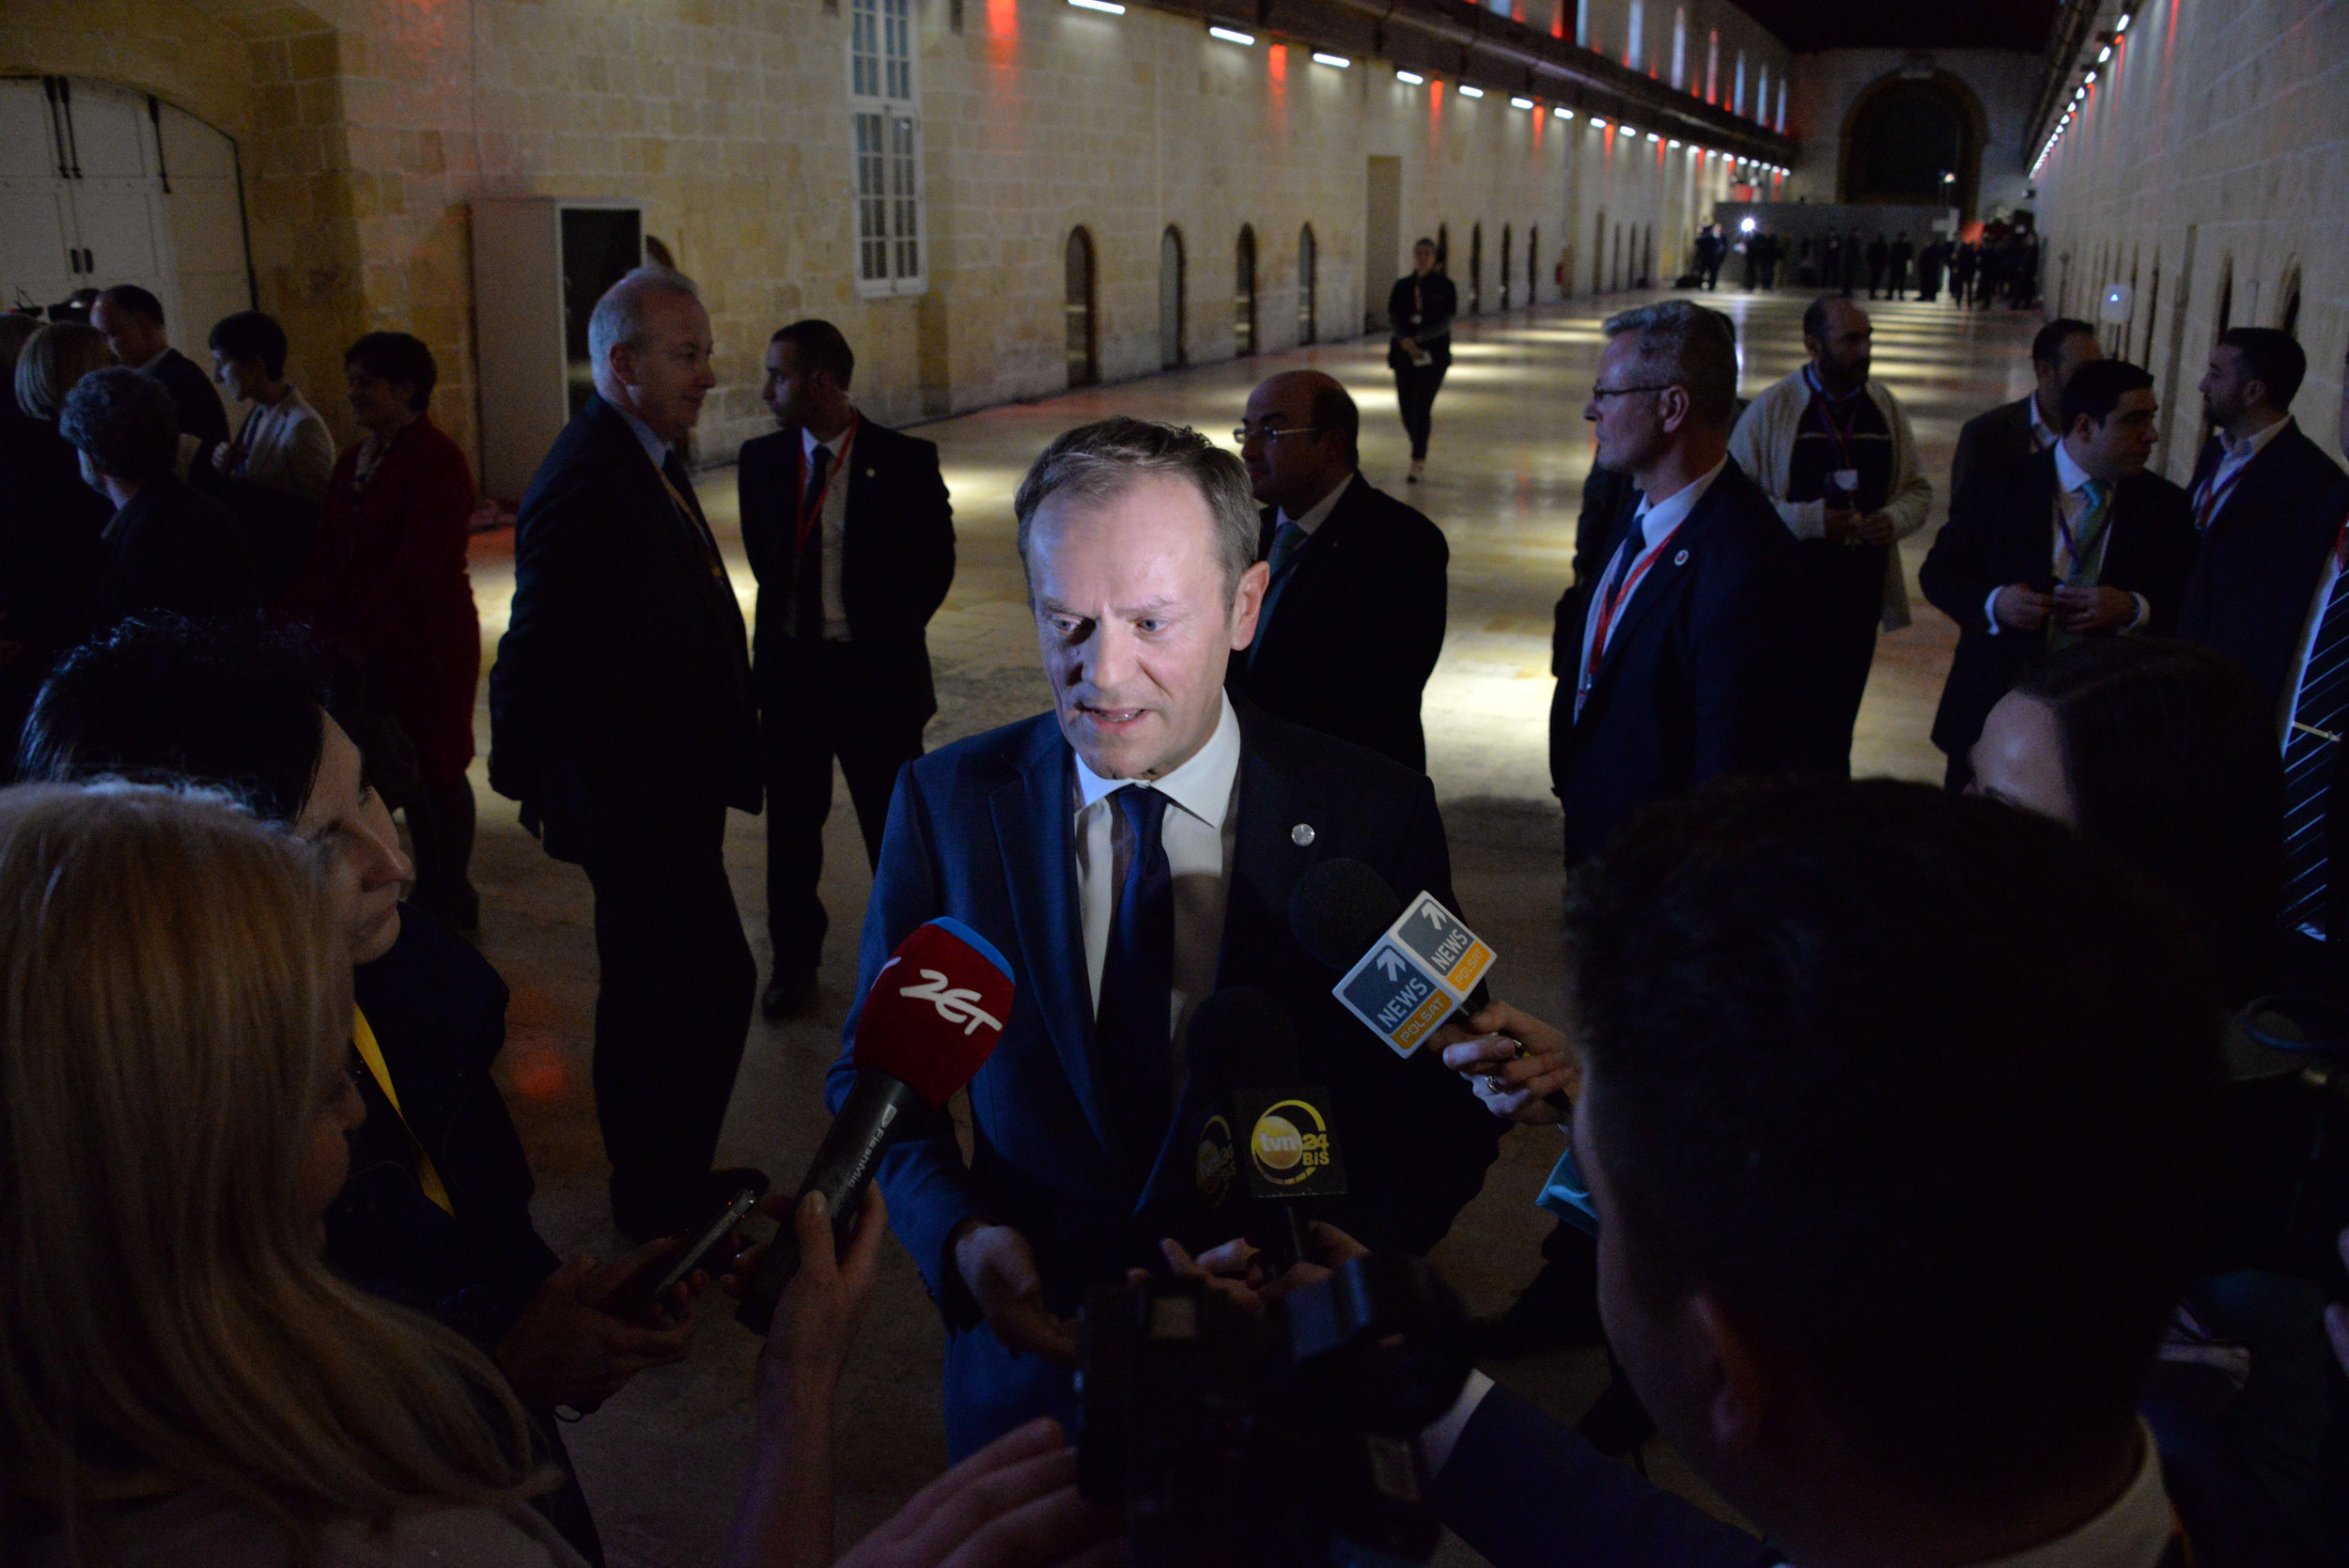  European Council President Donald Tusk speaking with journalists in Valletta, Malta, Friday, Feb. 3, 2017. A continued flow of migrants from the Middle East and Africa is pressuring the European Council to act with some calling for cooperation with 